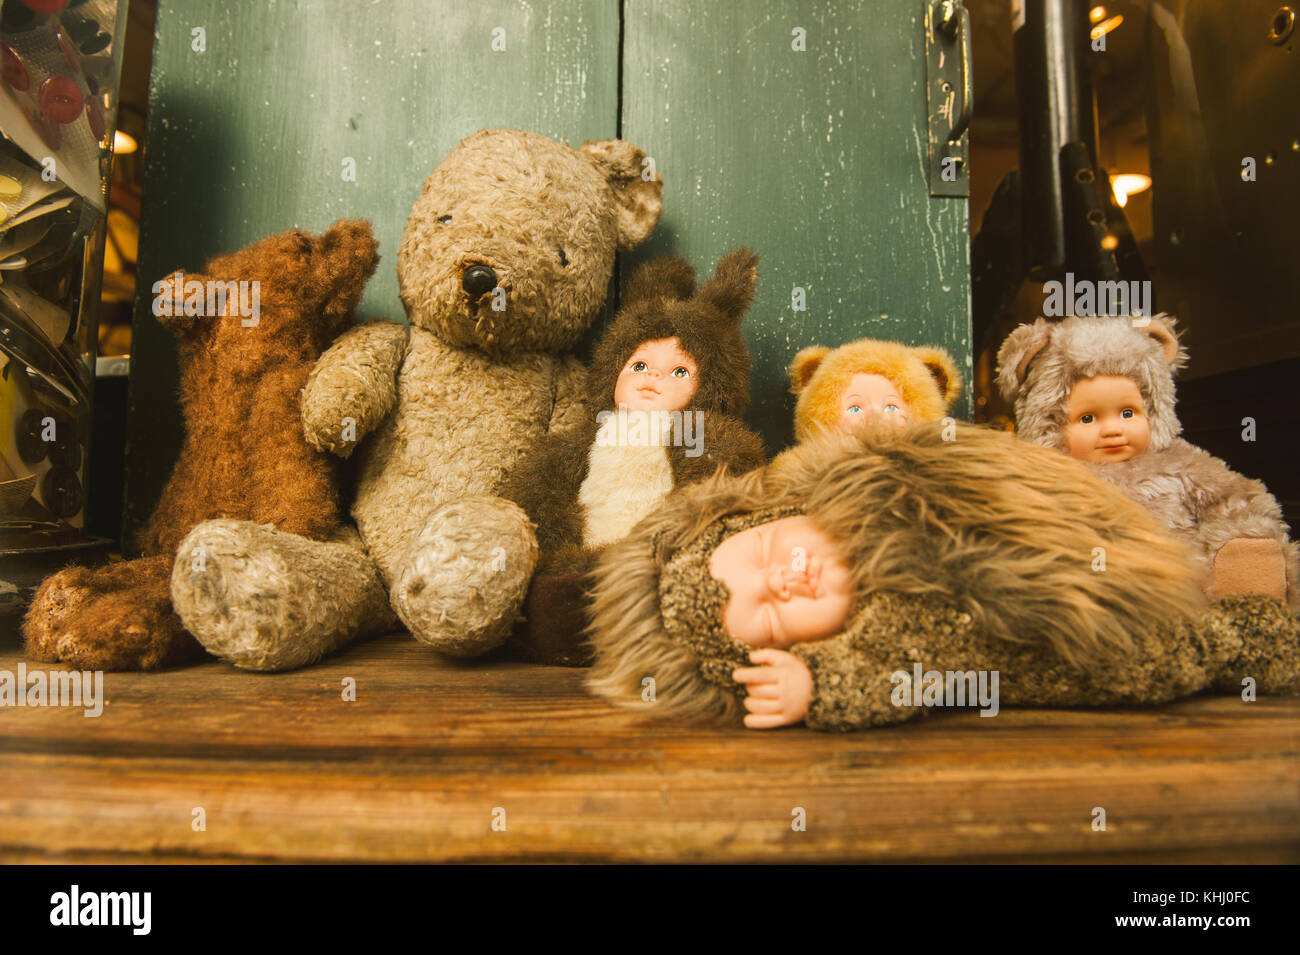 A collection of stuffed toys and dolls on display in an antique store. Stock Photo